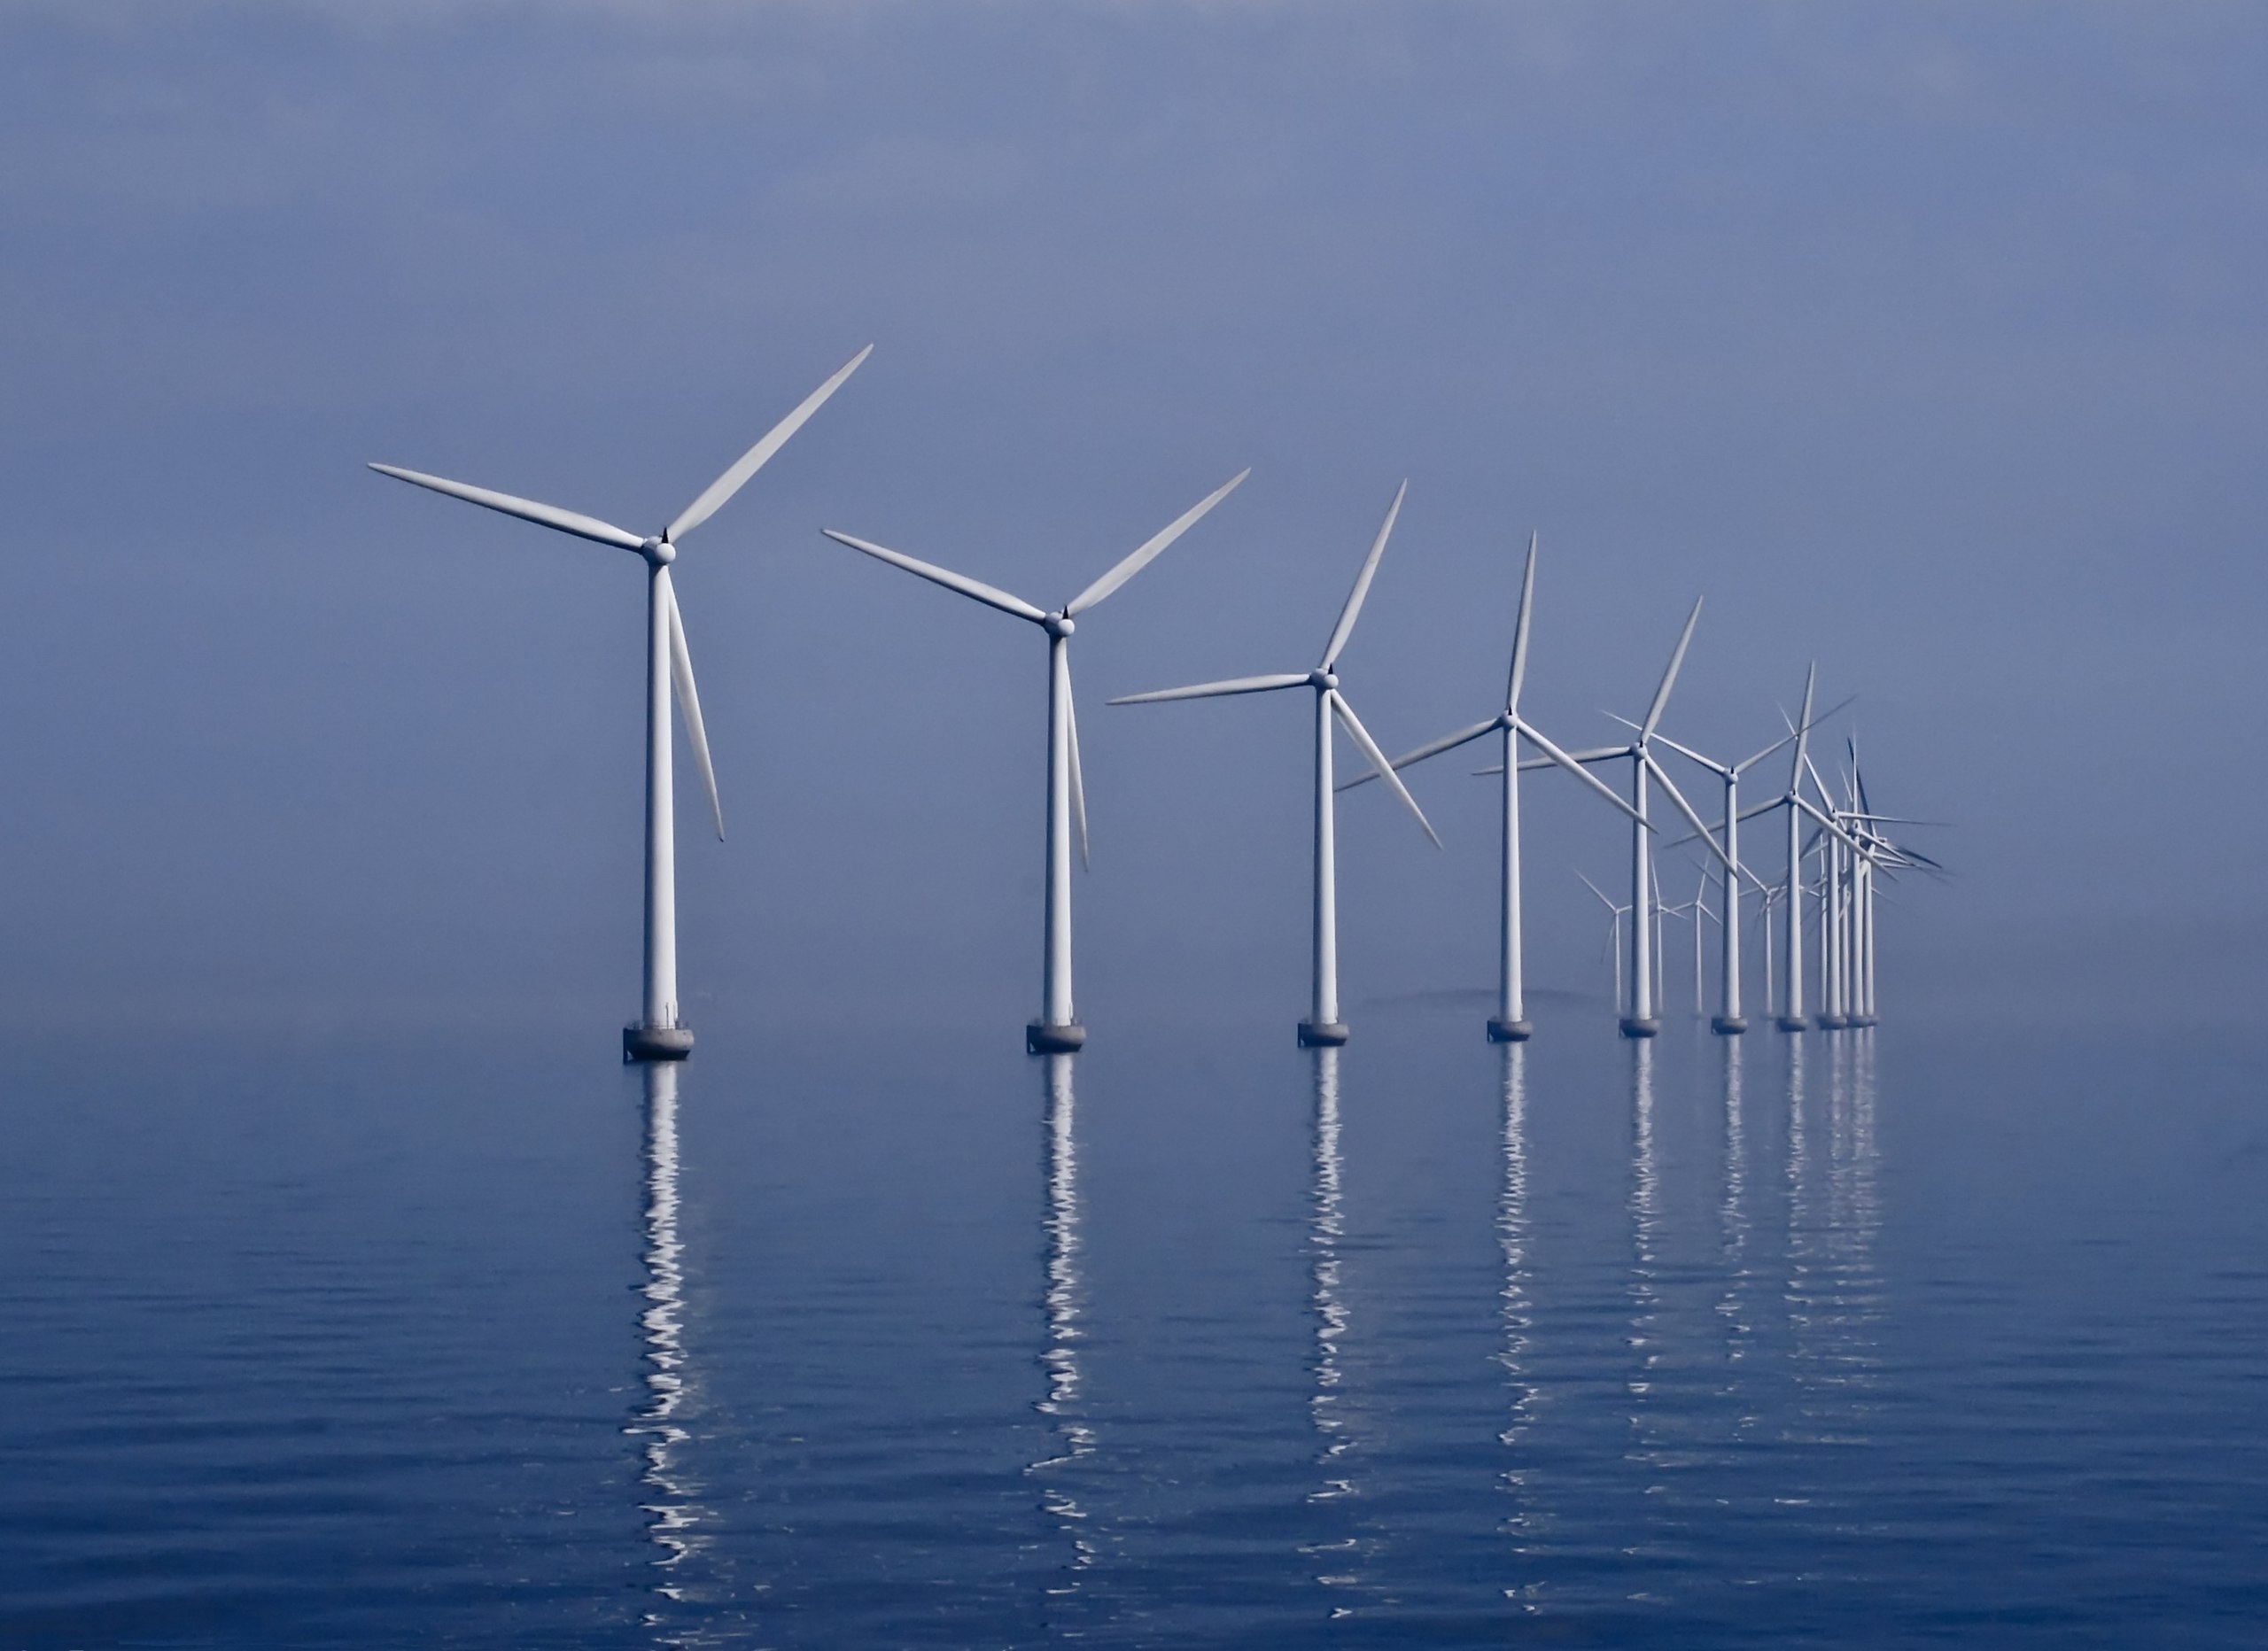 Offshore wind farm: a group of wind turbines in the sea off the coast of Denmark